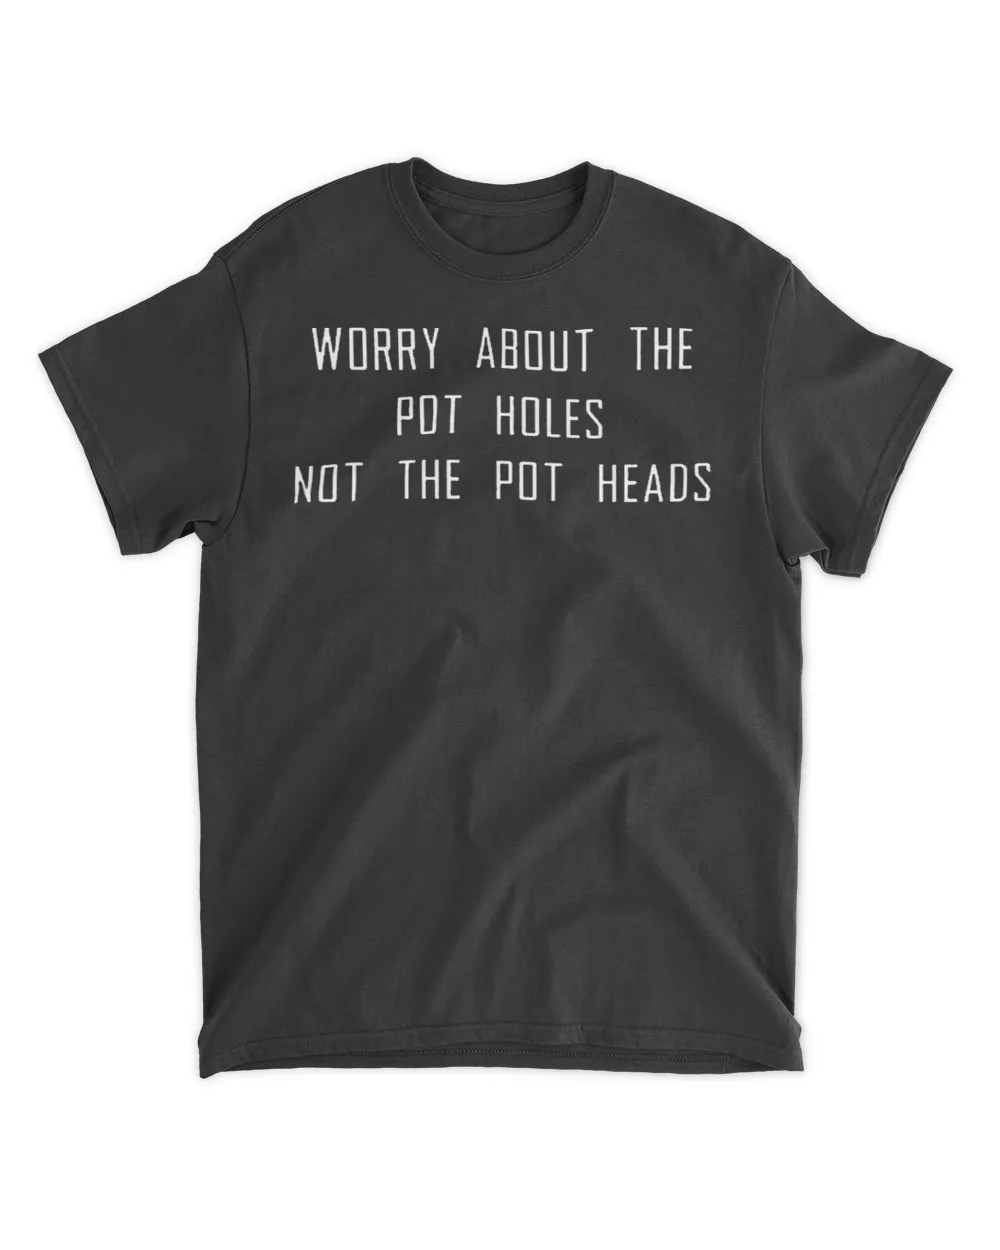  Worry about the pot holes not the pot heads shirt